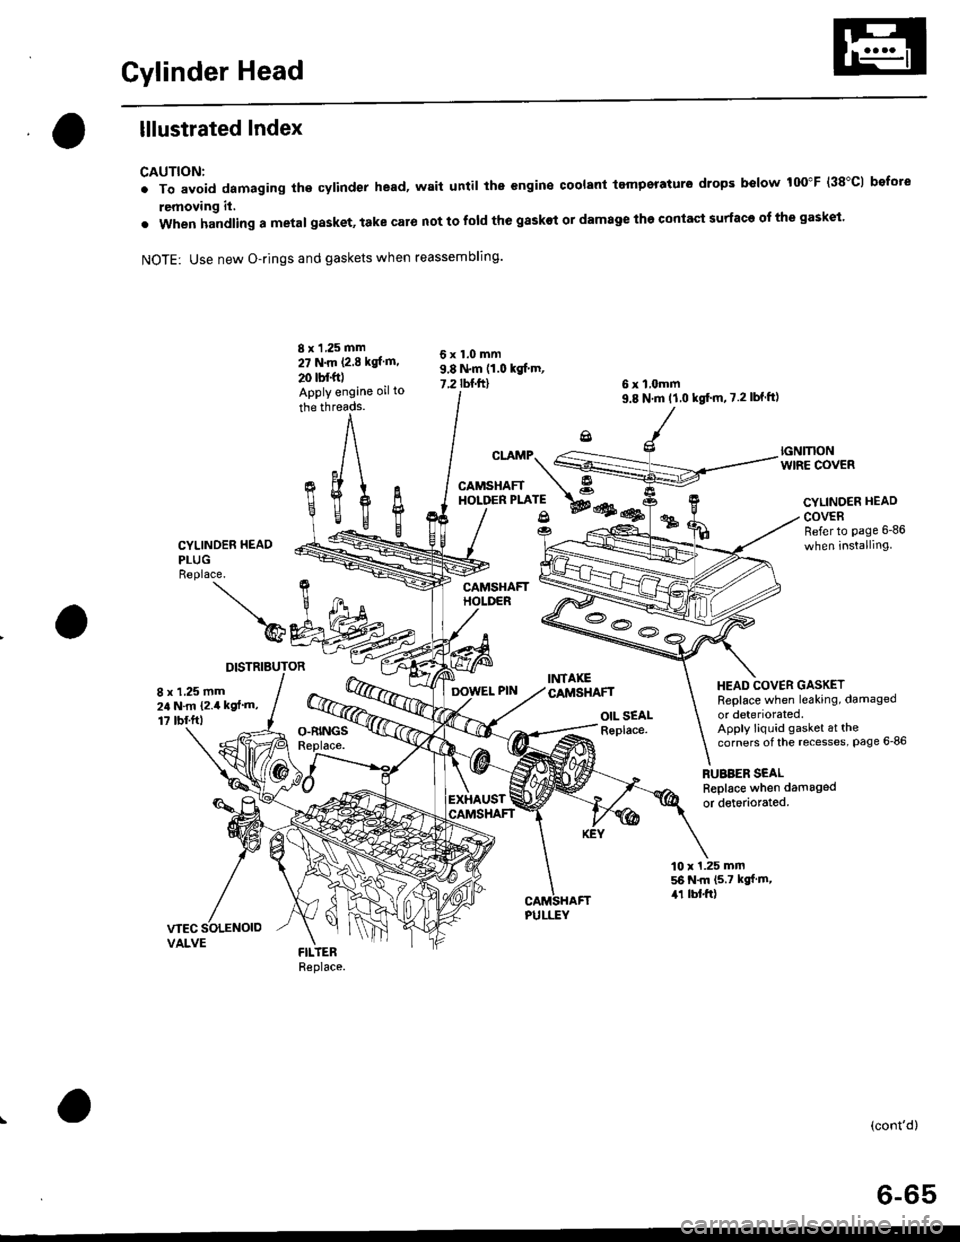 HONDA CIVIC 1996 6.G Workshop Manual Cylinder Head
lllustrated Index
CAUTION:
. To avoid damaging the cylinder head, wait until the engine coolant tempsraturo drops below 100"F (38"C1 bofote
removing it,
. when handling a metal gasket, t